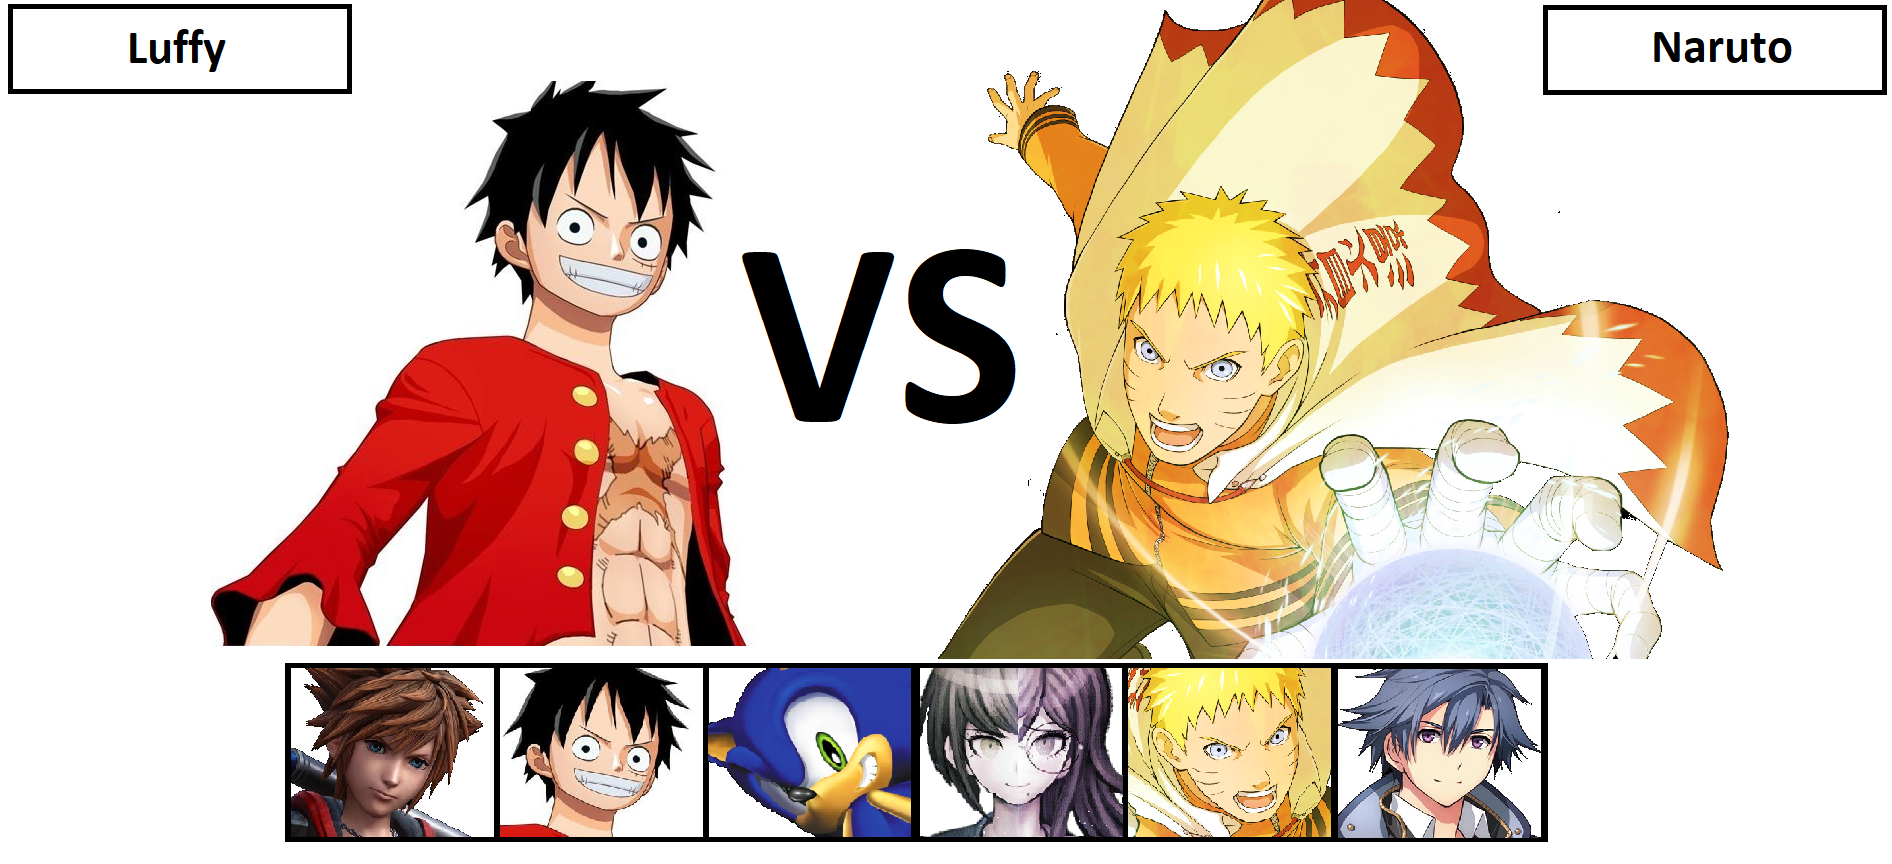 Naruto X One piece  Anime running, Anime characters, Anime crossover